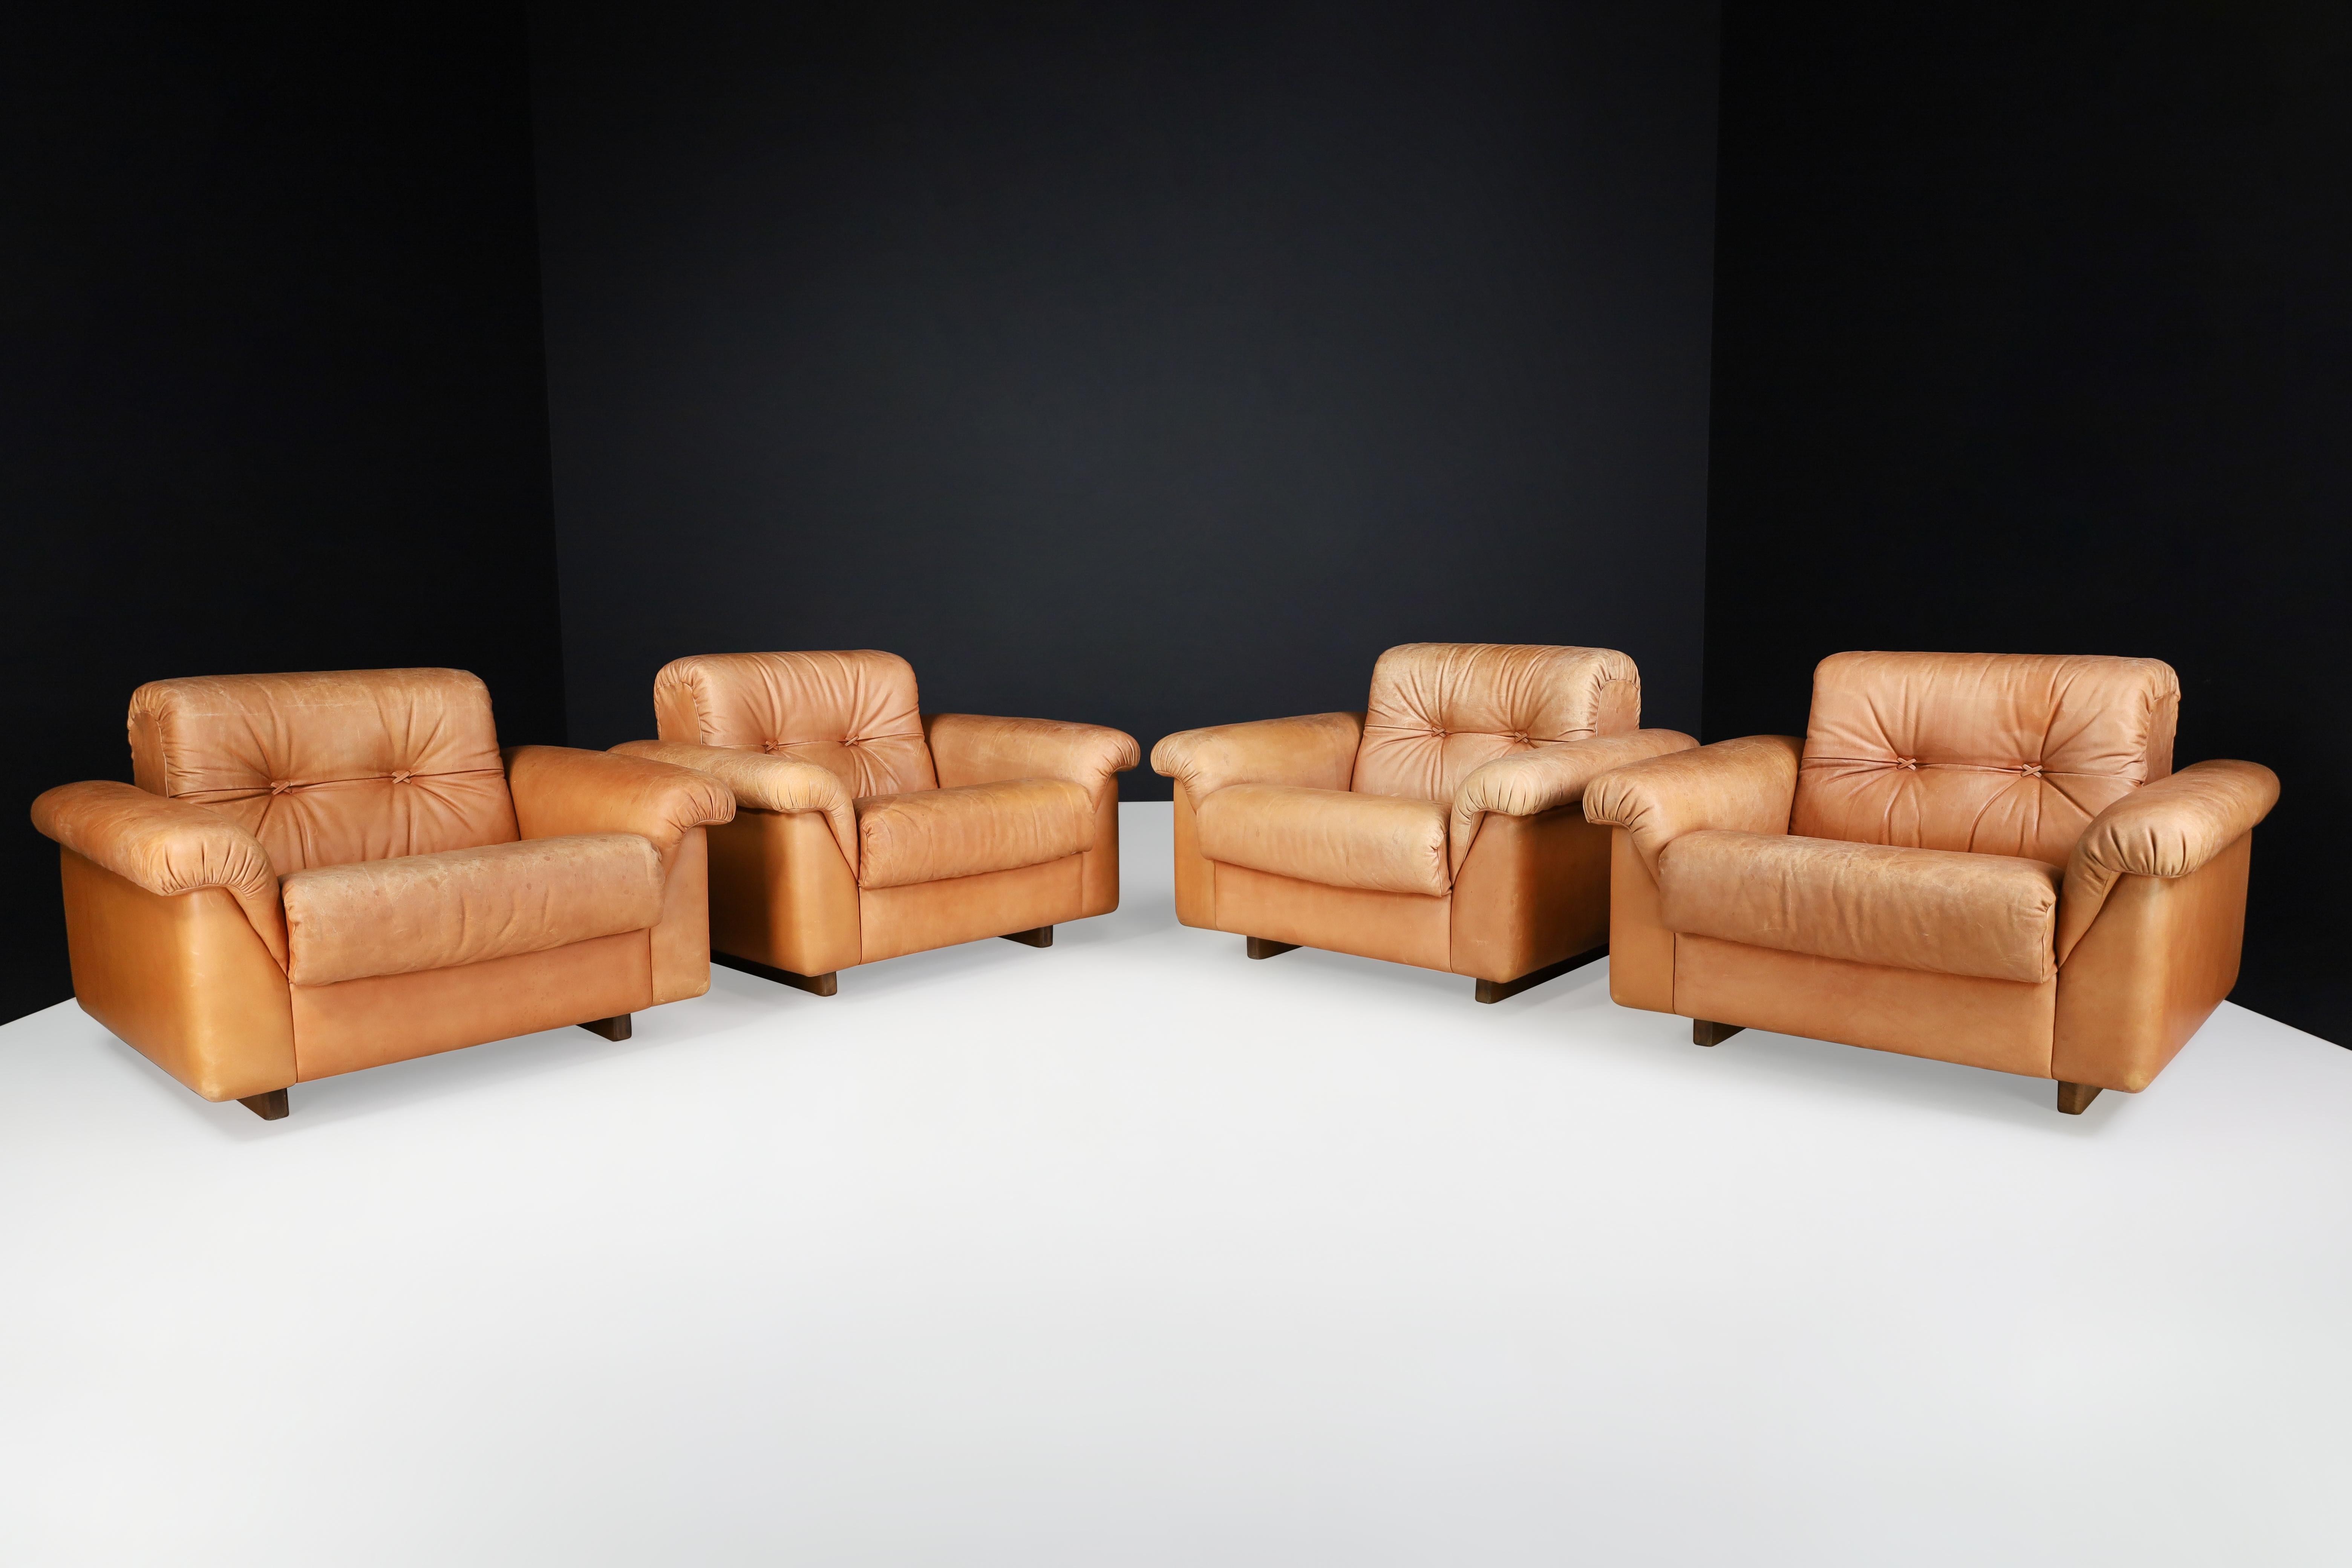 De Sede DS 45 lounge chairs in patinated leather, Switzerland, 1970s.

Robust set of four DS-45 patinated leather lounge chairs. These De Sede lounge chairs ensure ultimate comfort and building quality with their solid wooden frame and thick